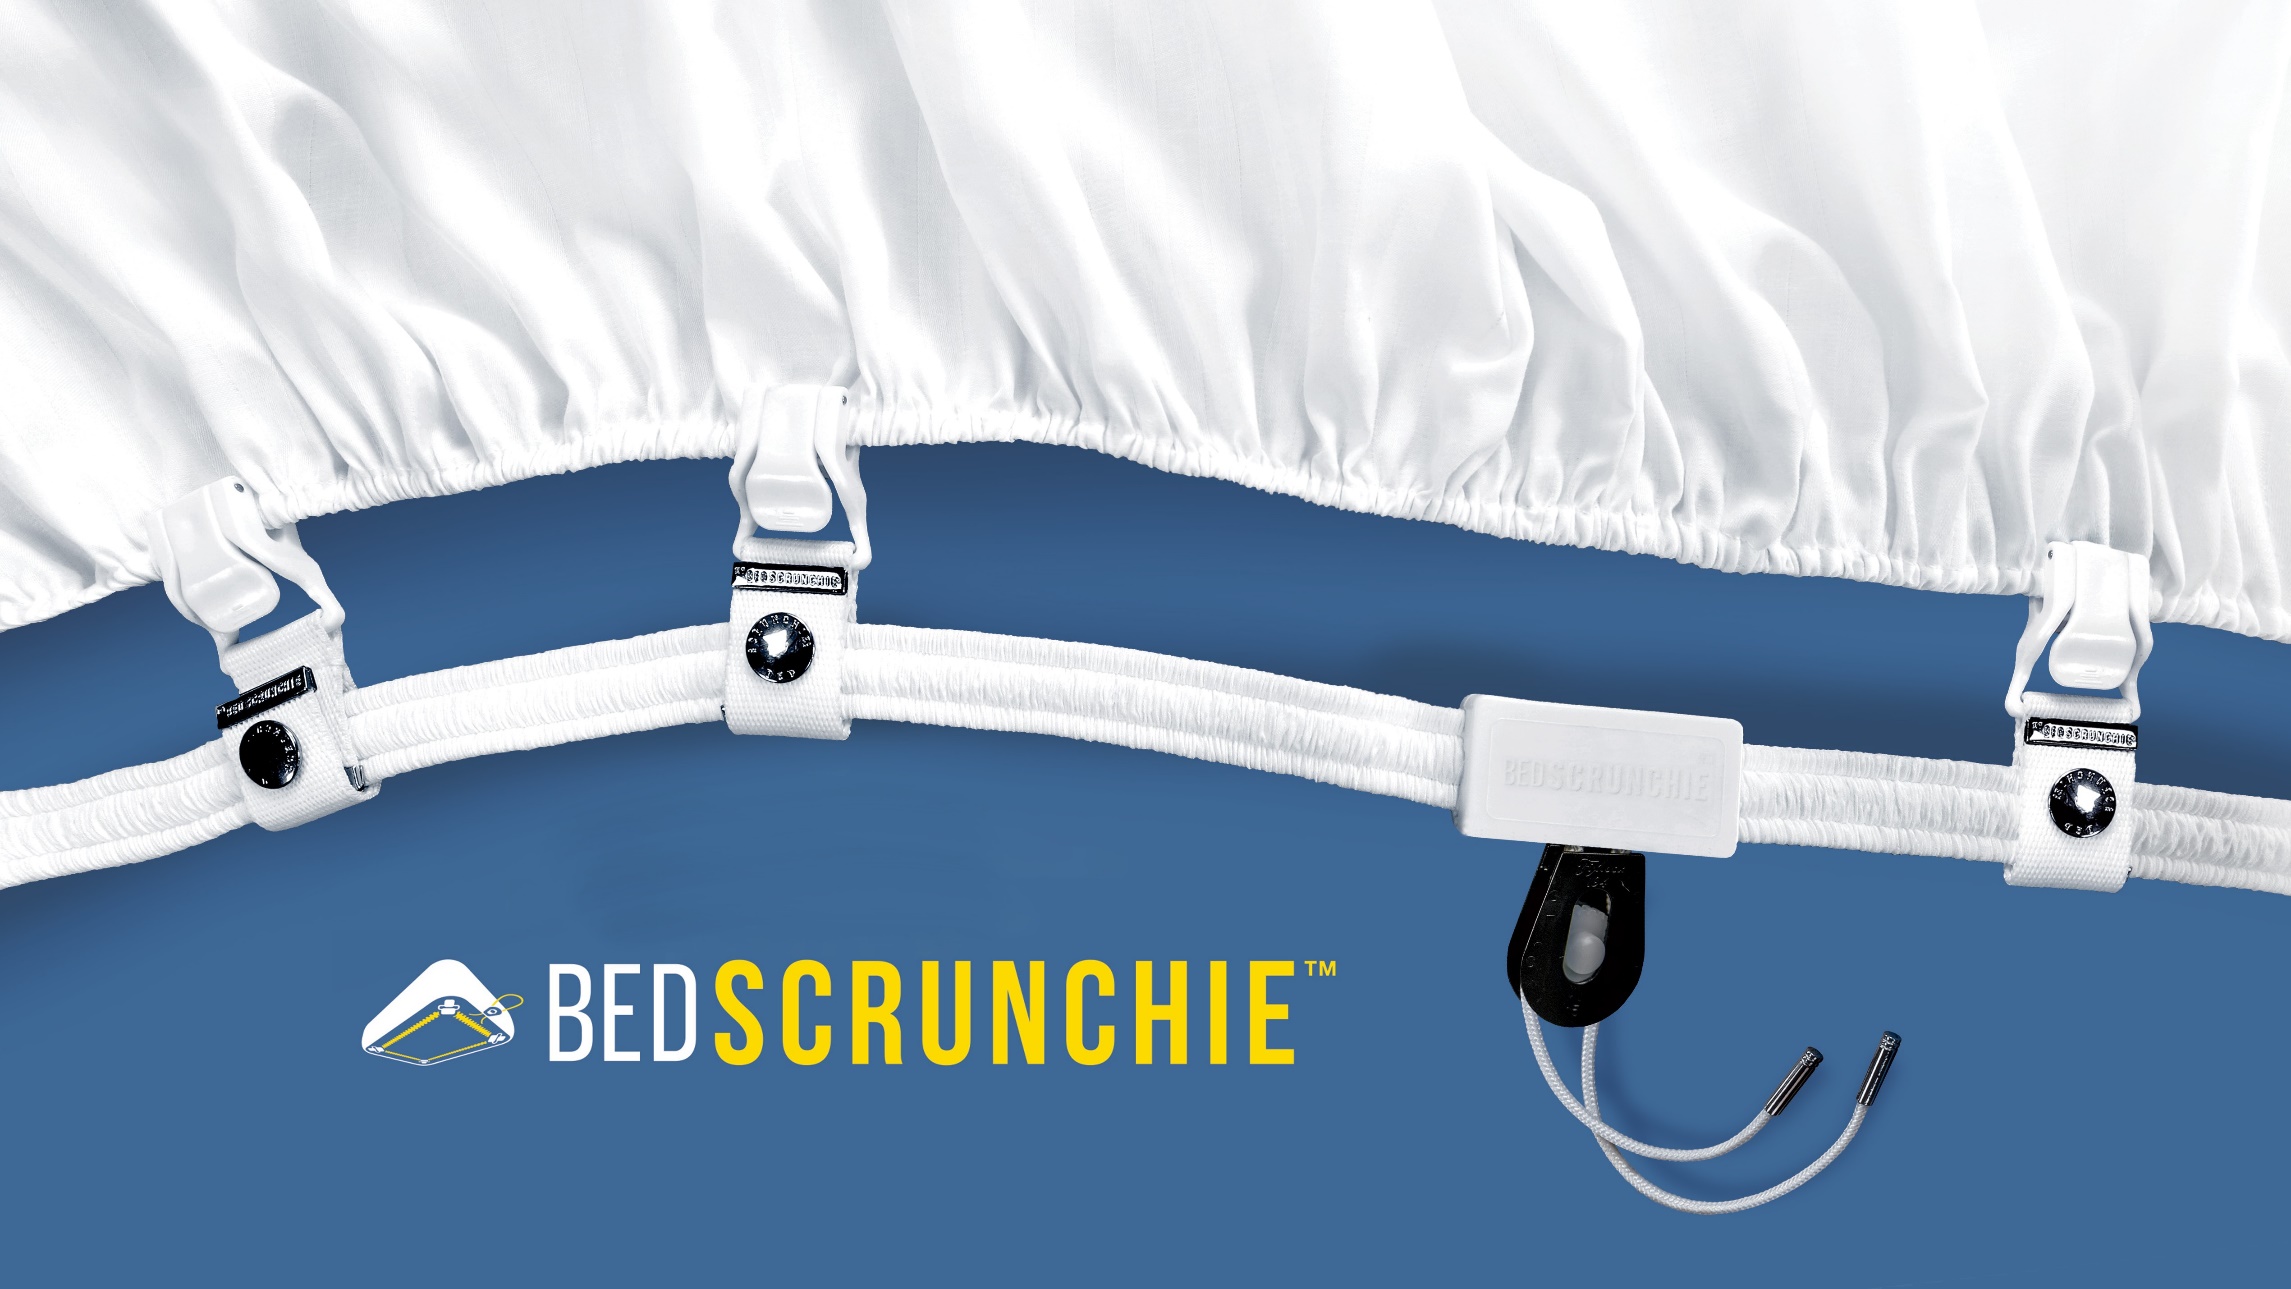 Bed Scrunchie - Needs extra clips for more grip? Get yours